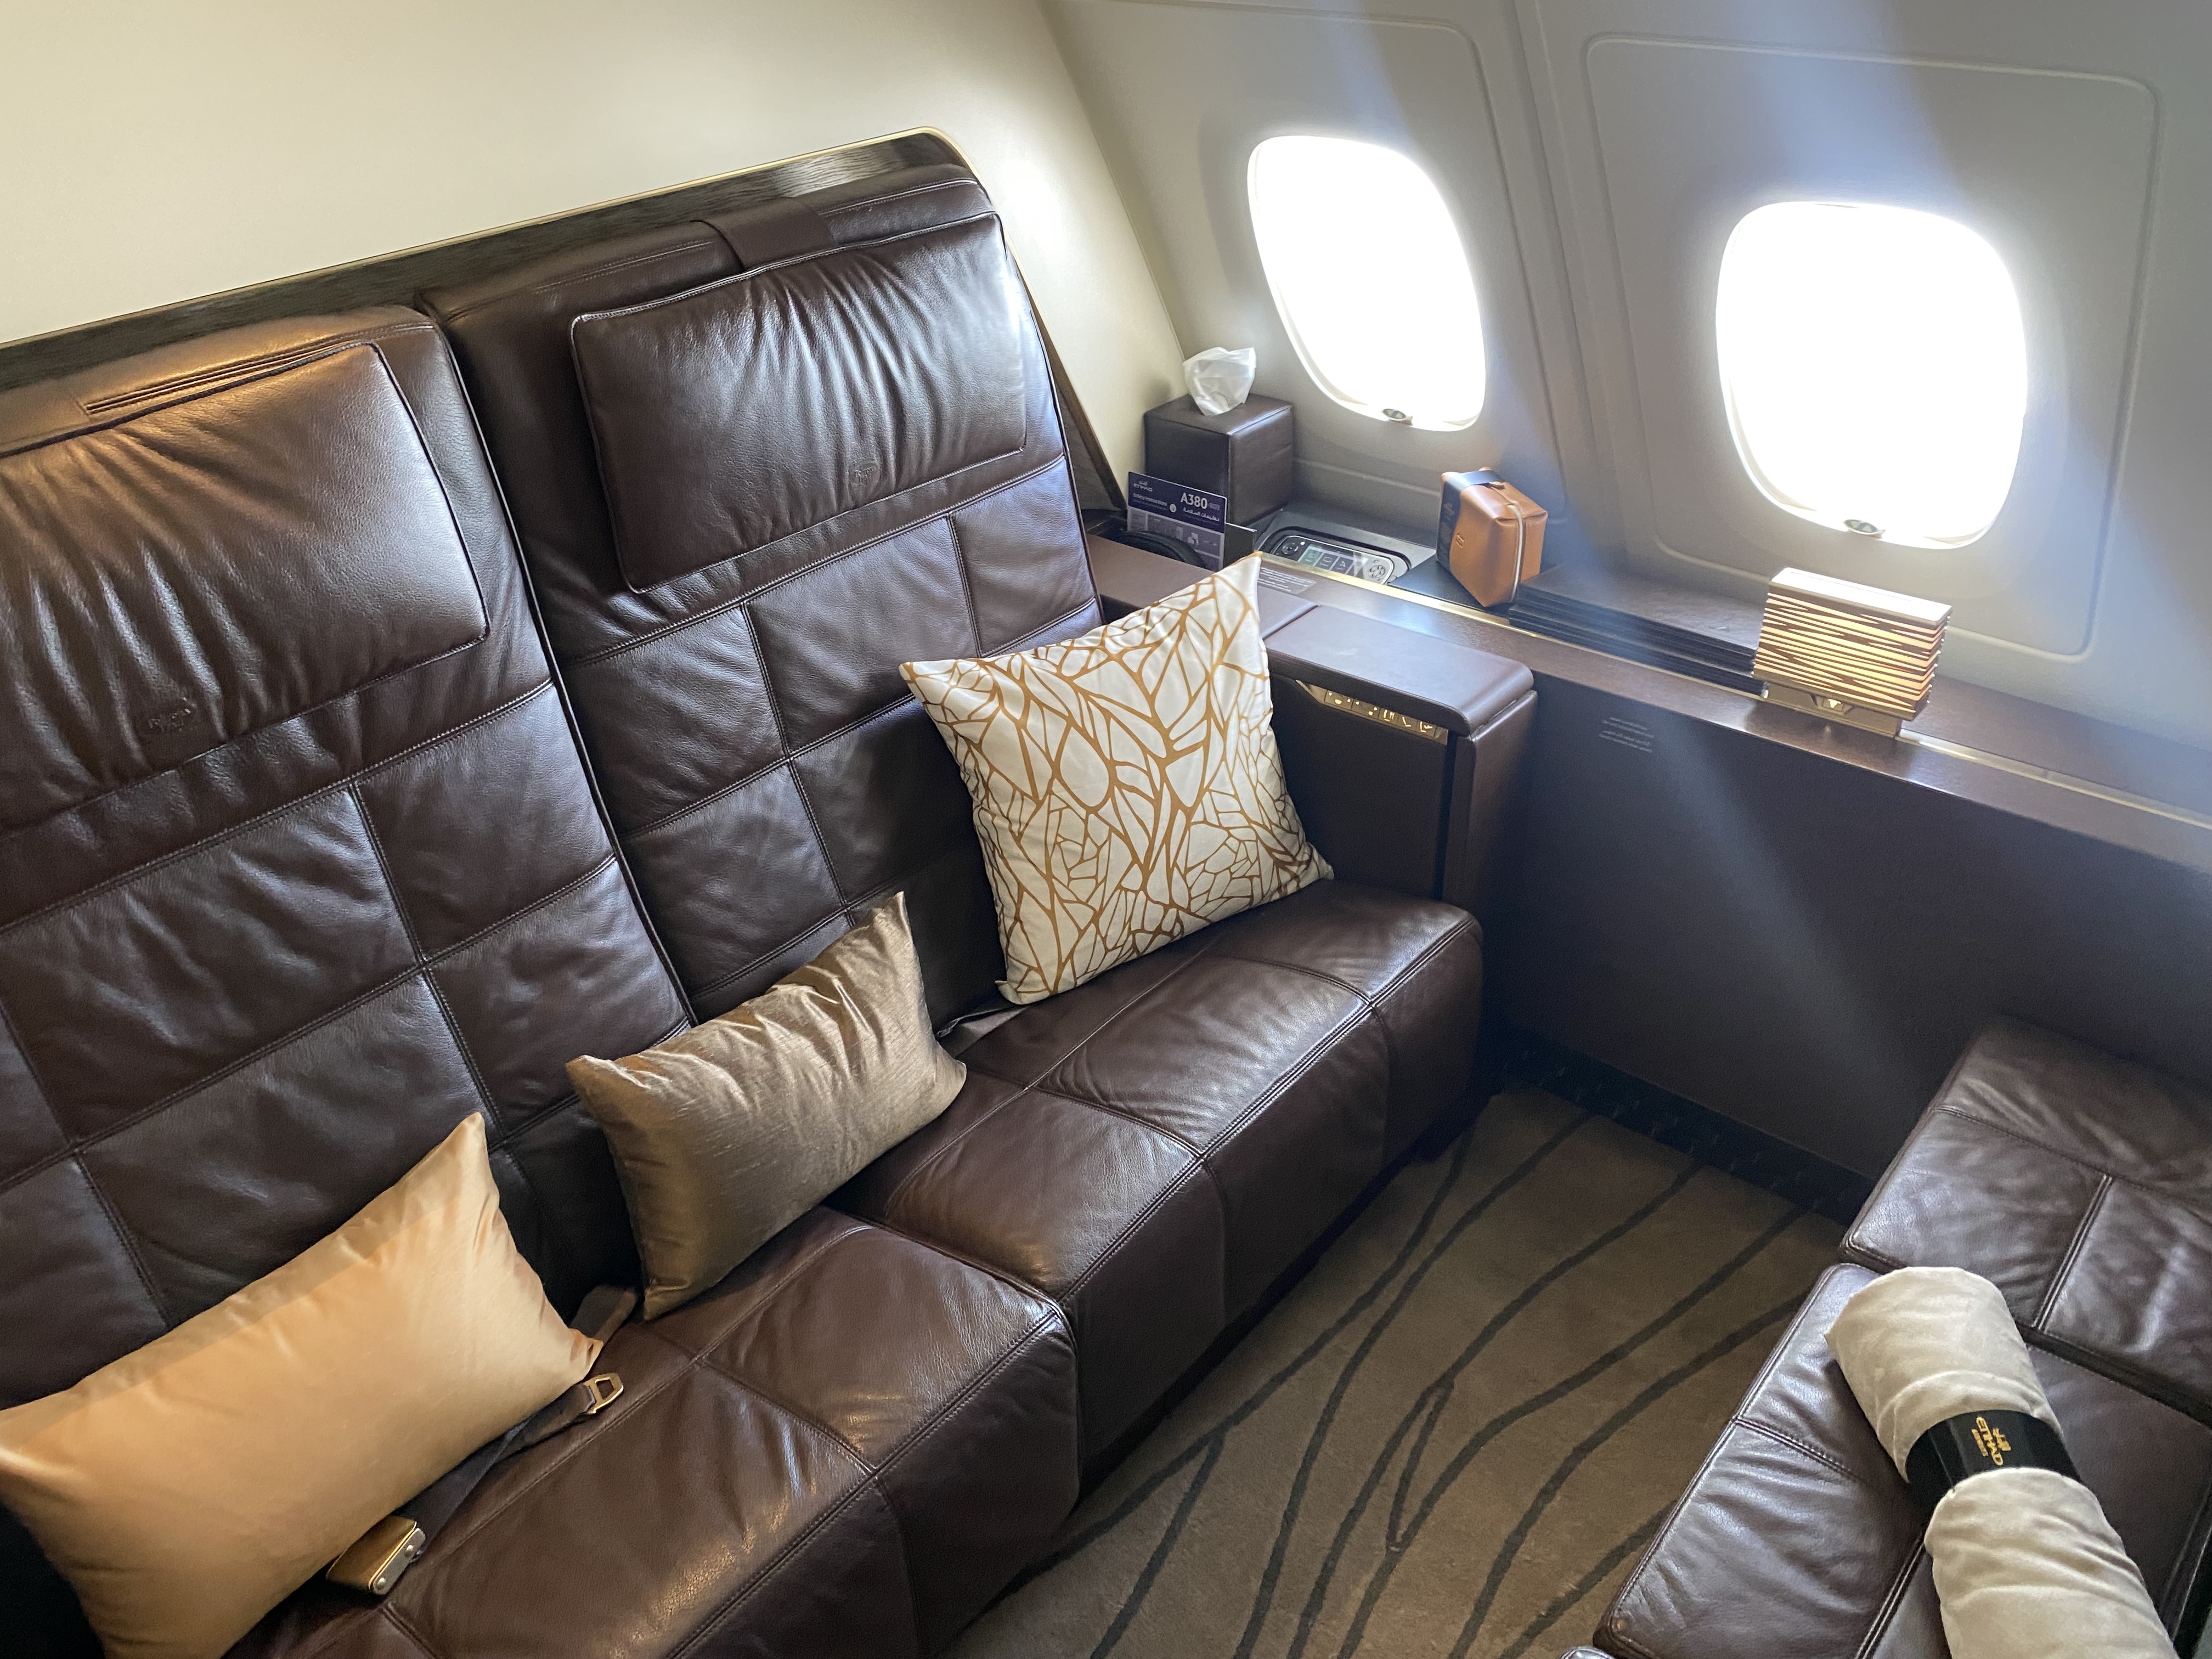 Flying Etihad Airways The Residence (The World’s Best First Class)